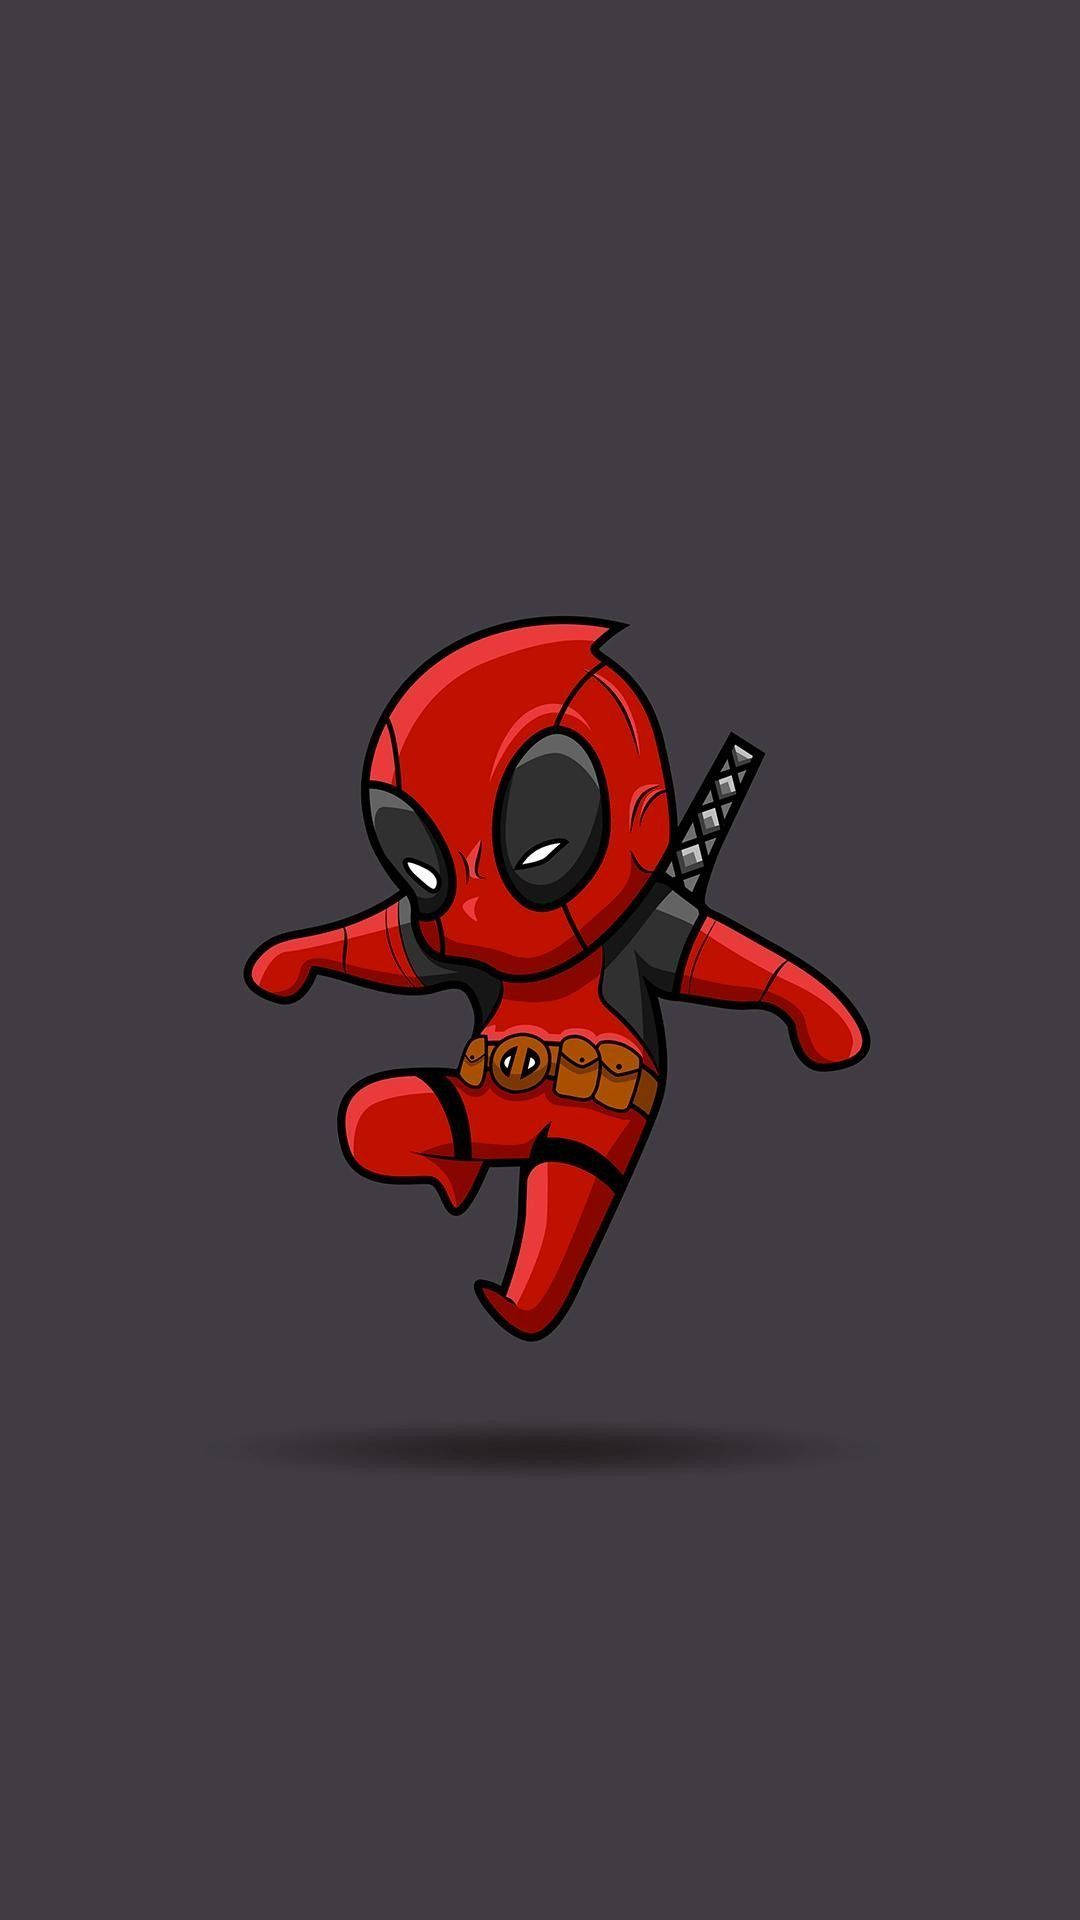 "Explore the Marvel Universe With Cute Marvel Super Heroes" Wallpaper